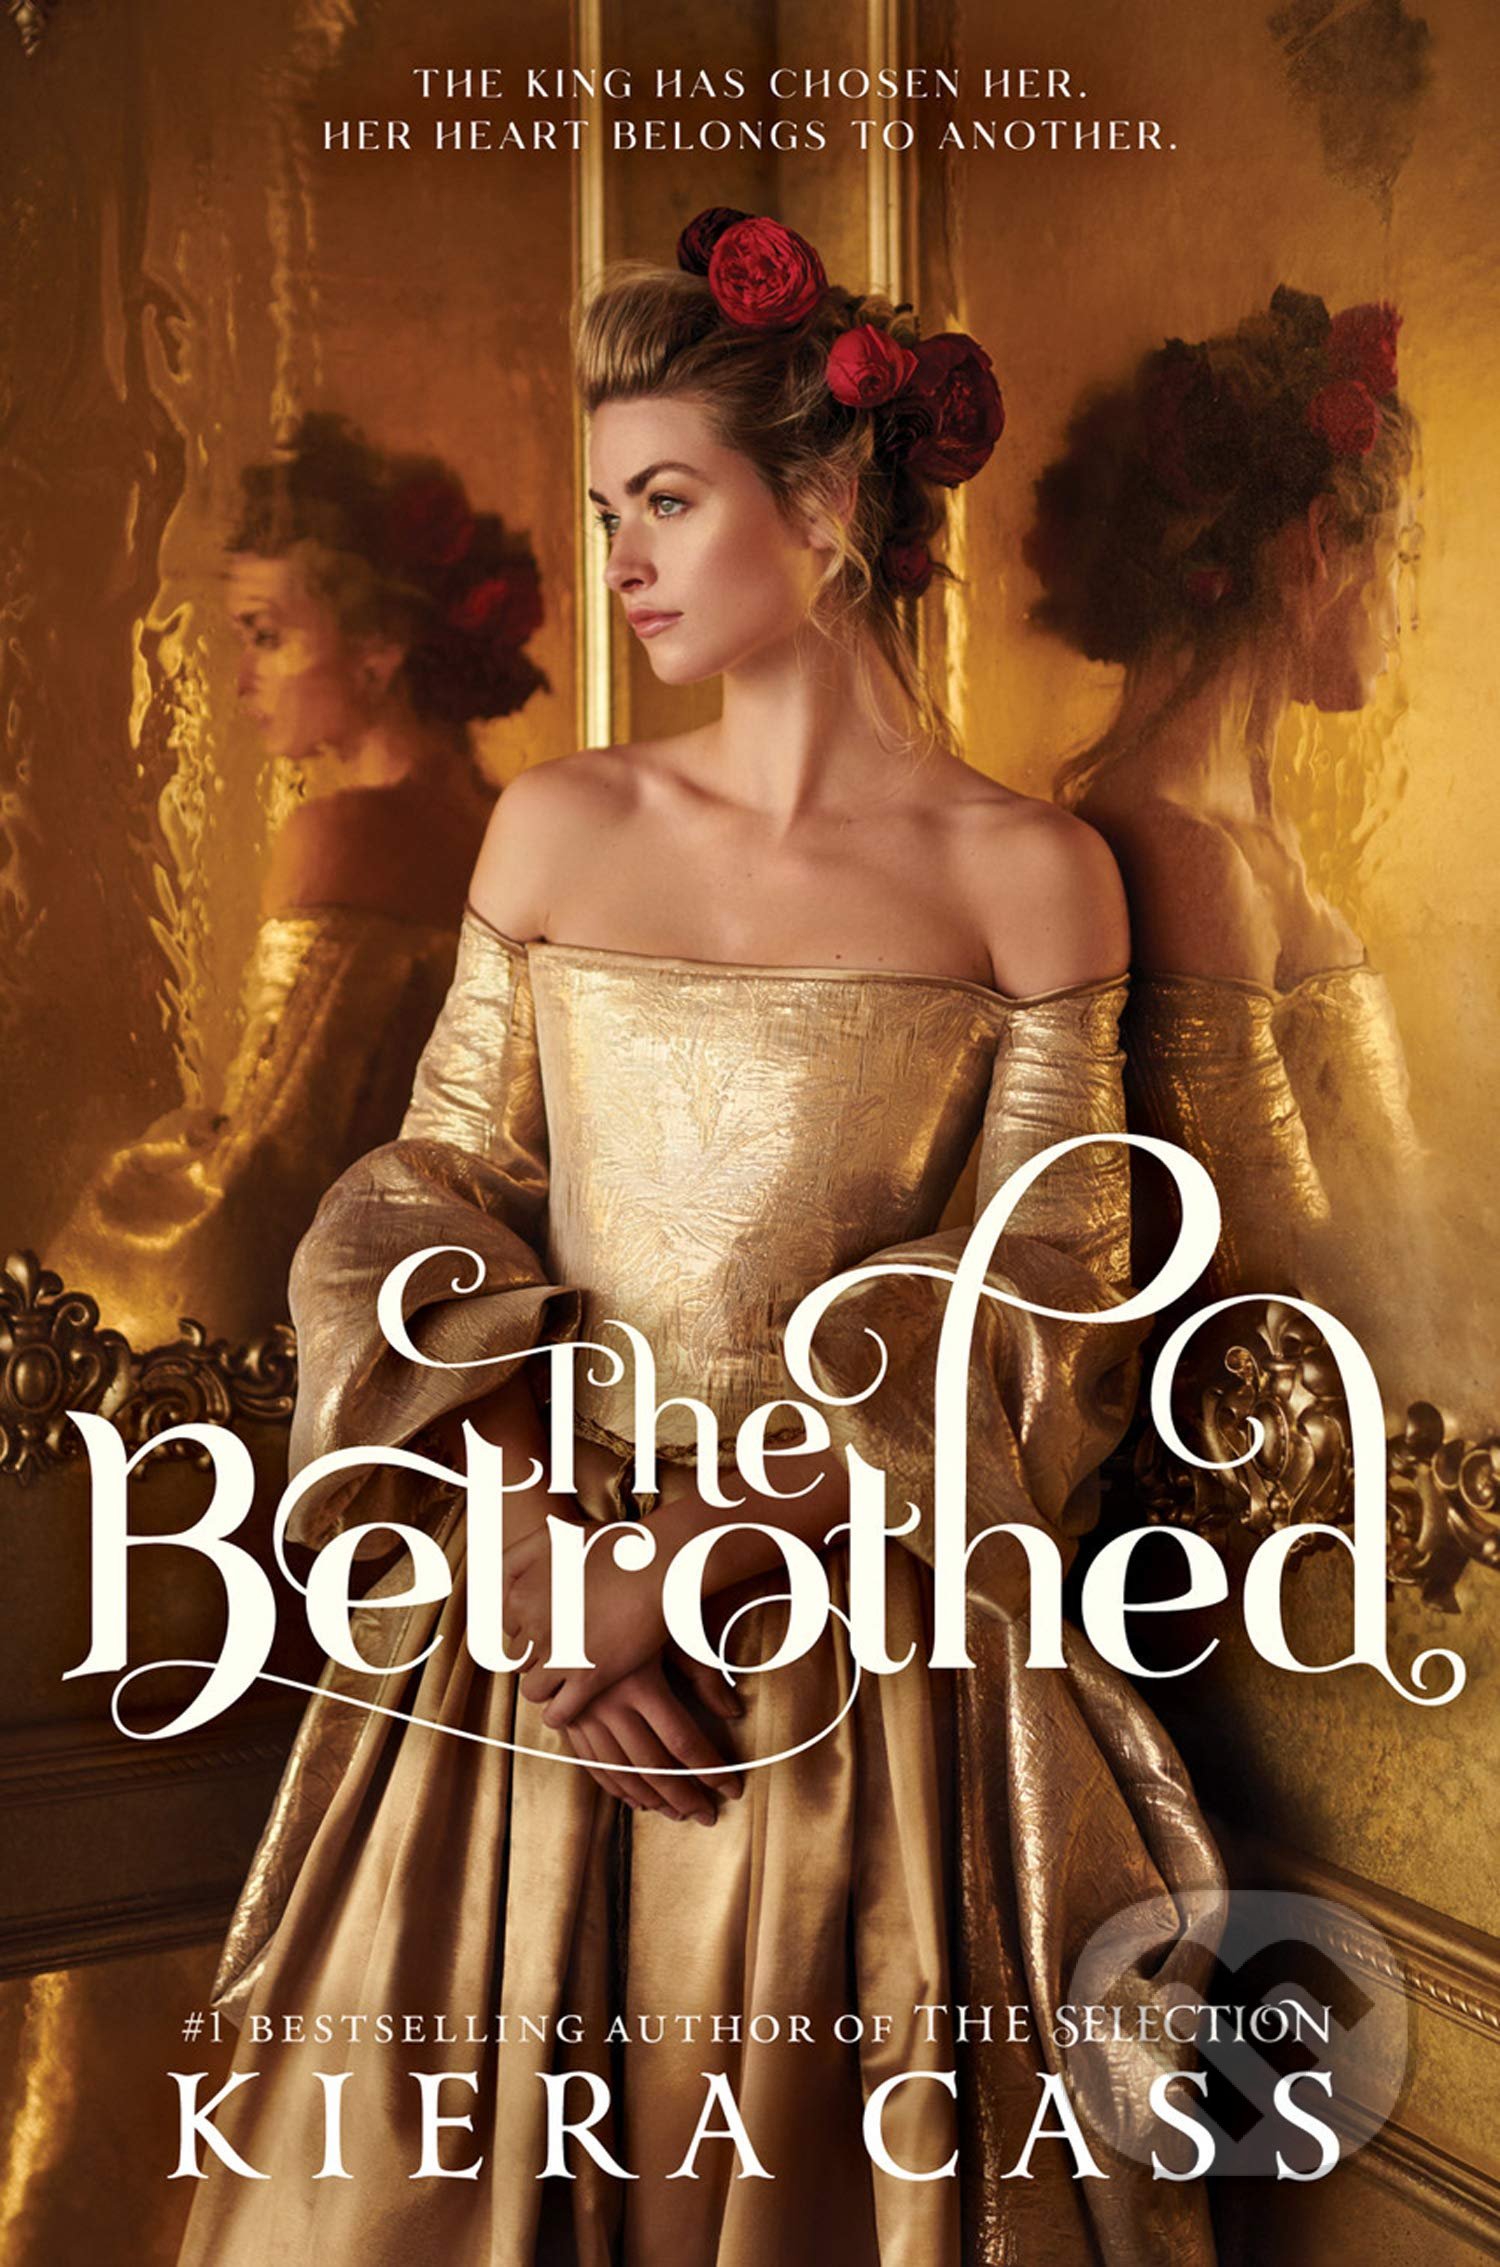 The Betrothed - Kiera Cass, HarperCollins, 2020